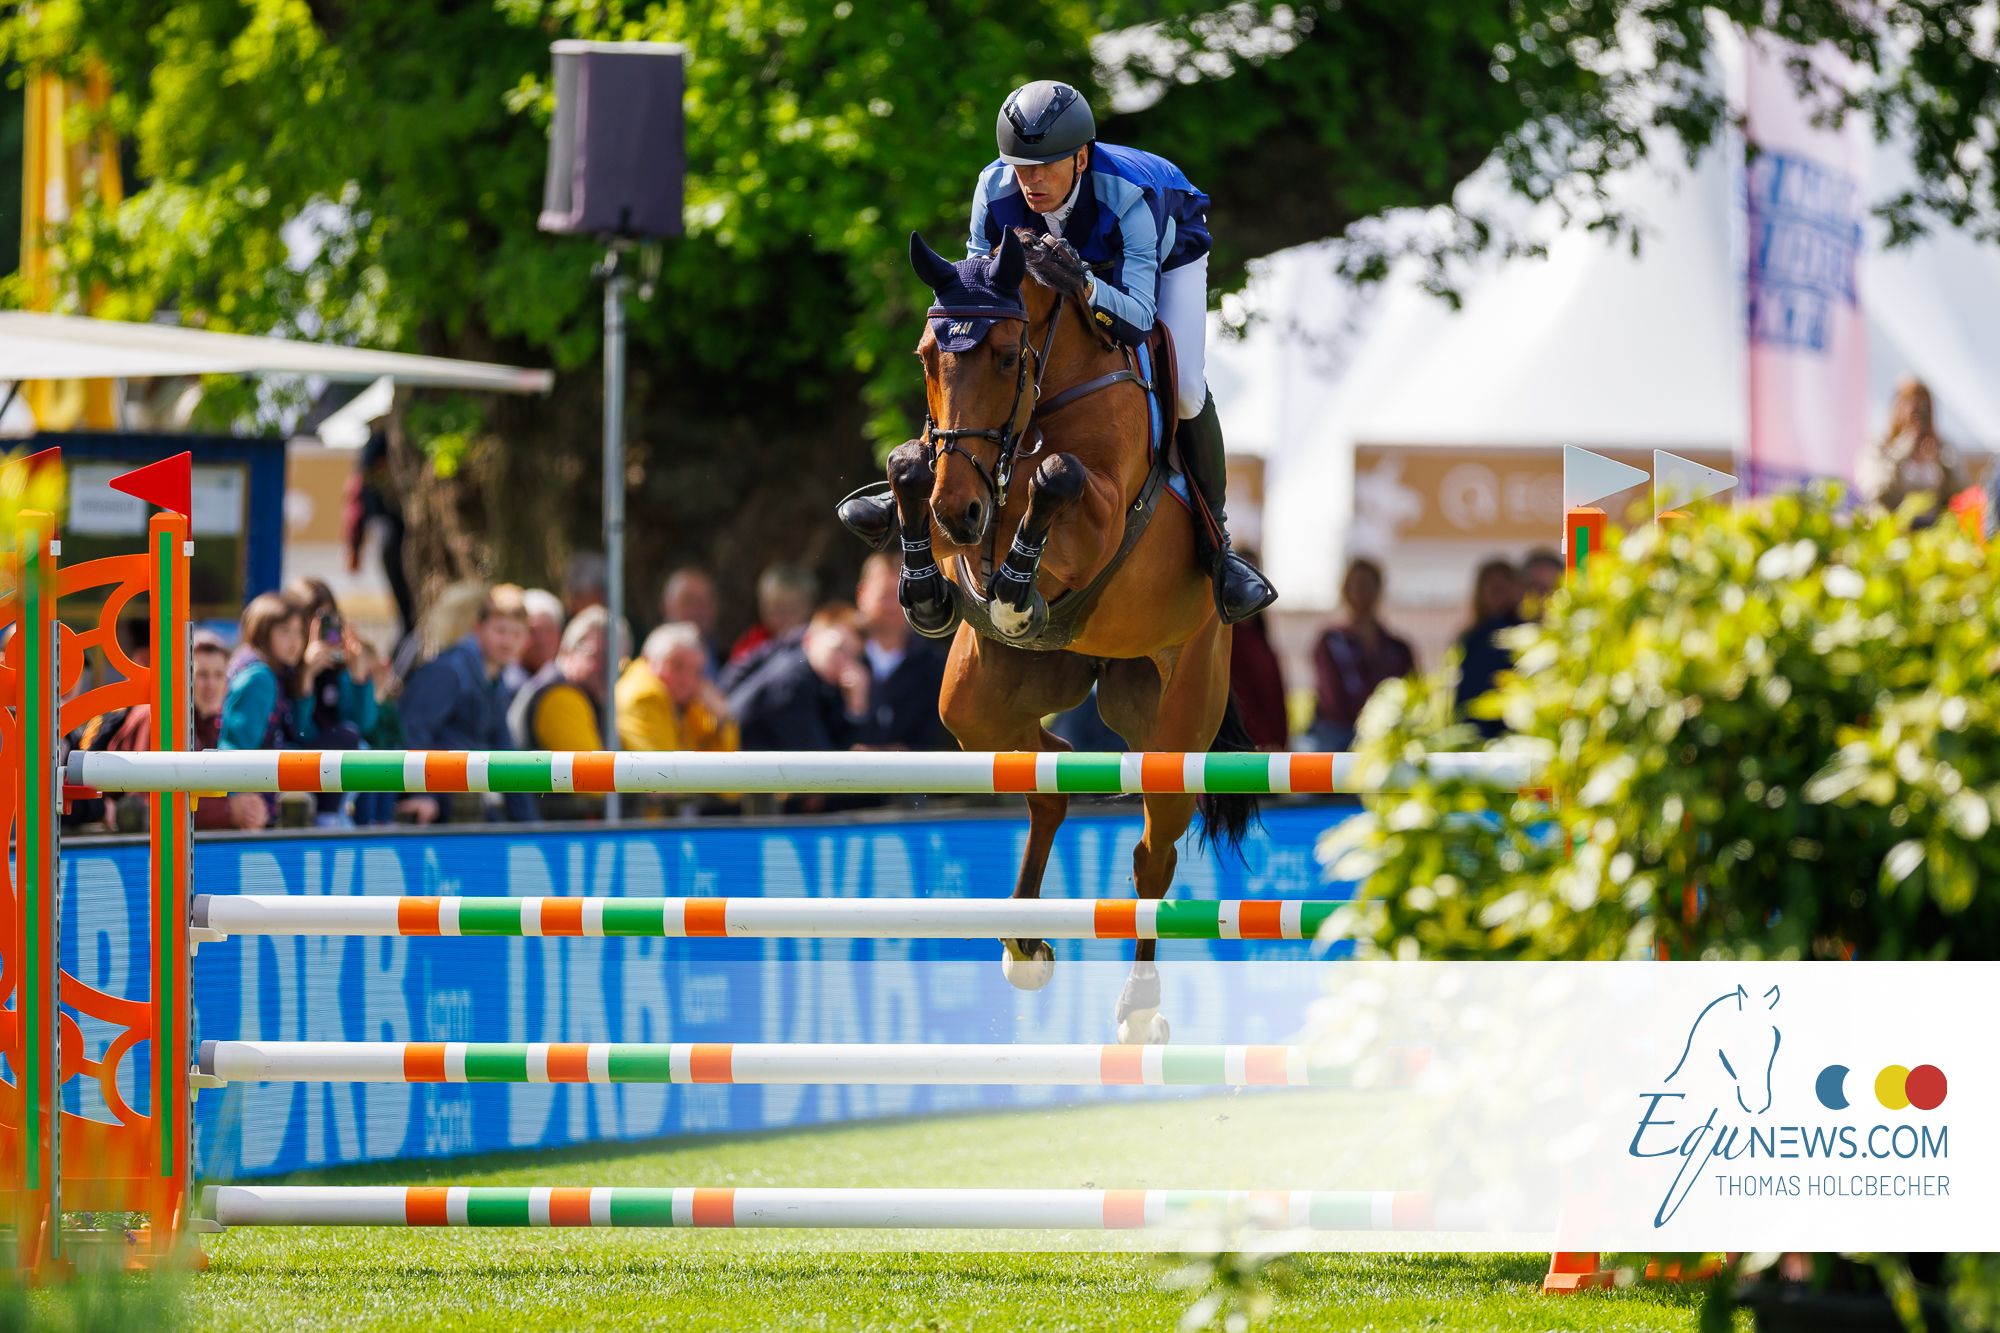 [UPDATE] No fractures found on Peder Fredricson after fall in Stockholm, mare also fine